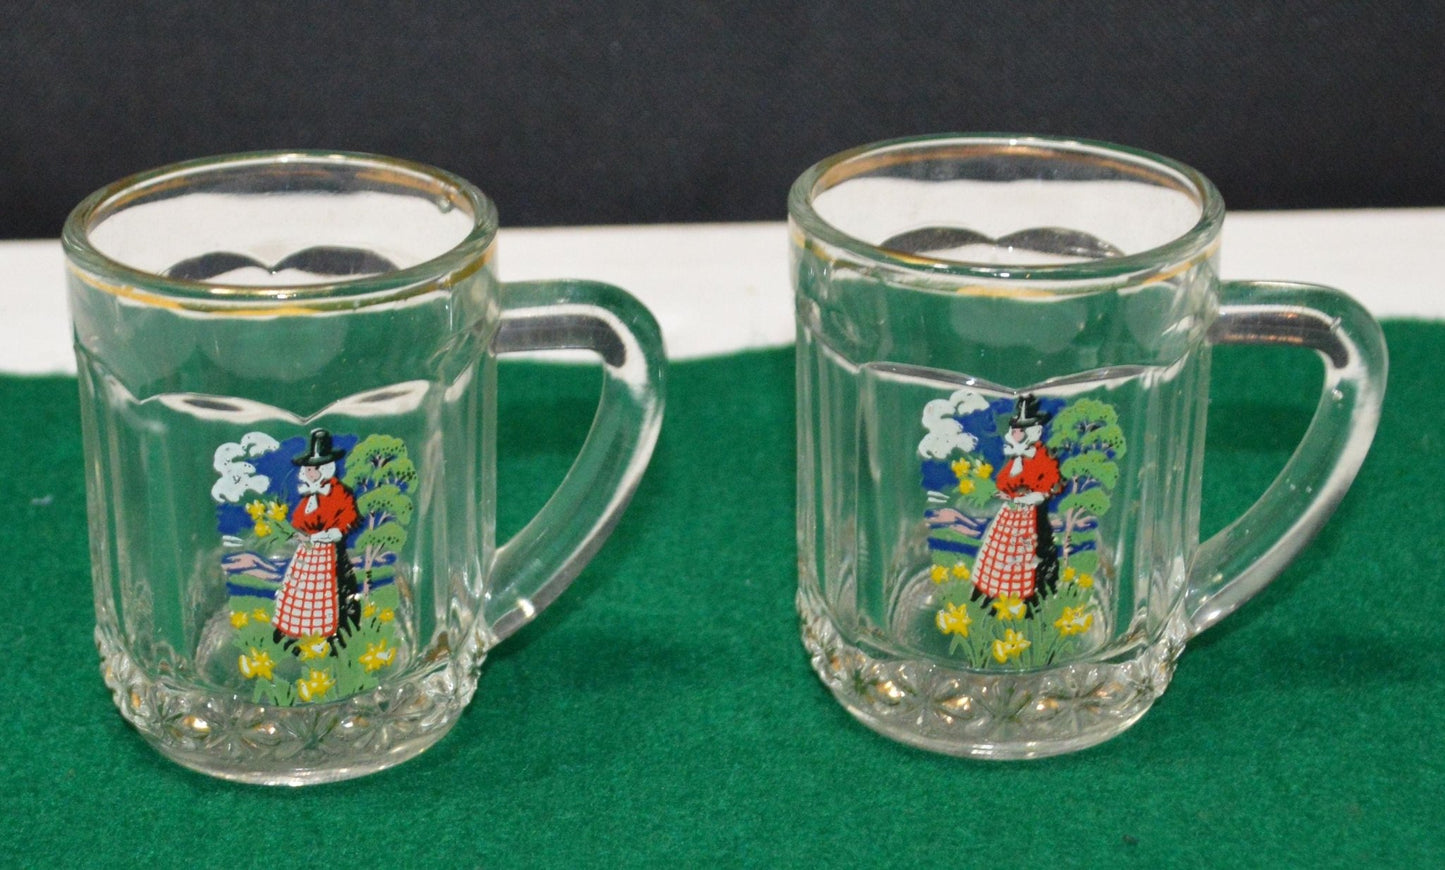 TWO MINIATURE GLASS TANKARDS DEPICTING THE TRADITIONAL COSTUME OF A WELSH LADY(PREVIOUSLY OWNED) GOOD CONDITION - TMD167207